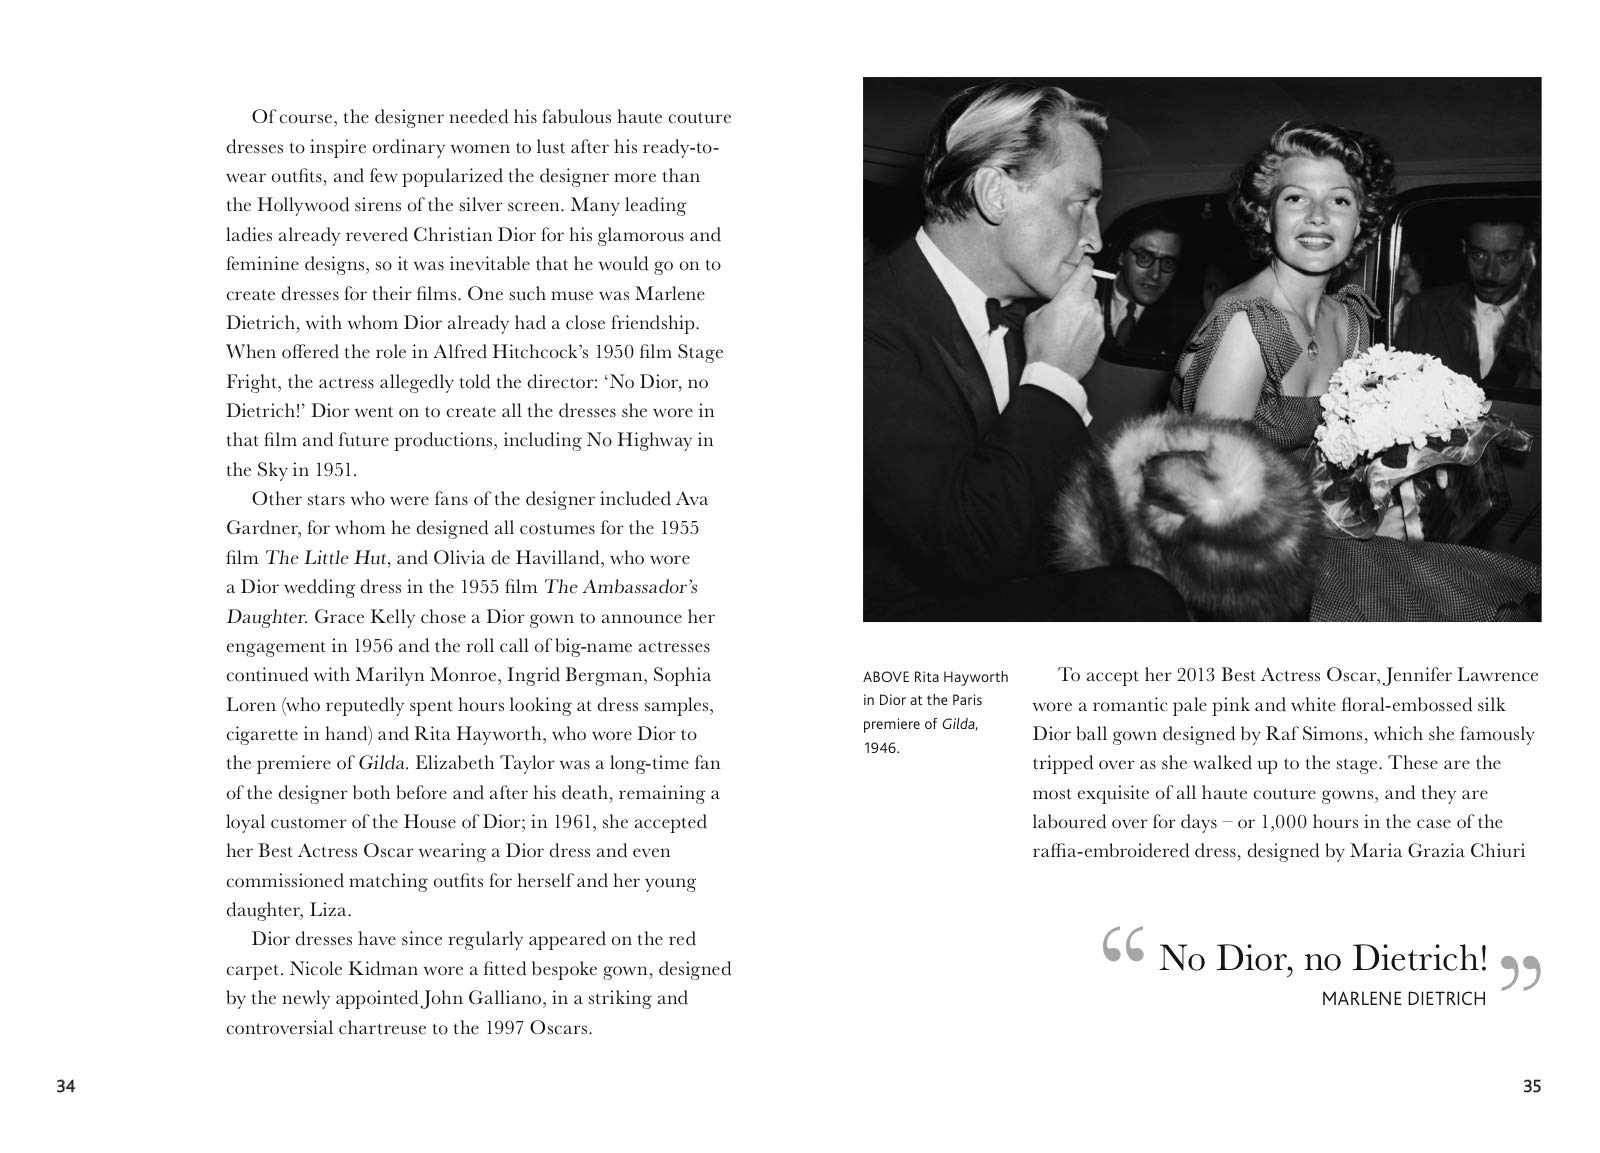 Little Book of Dior – Chic Interiors Cheshire